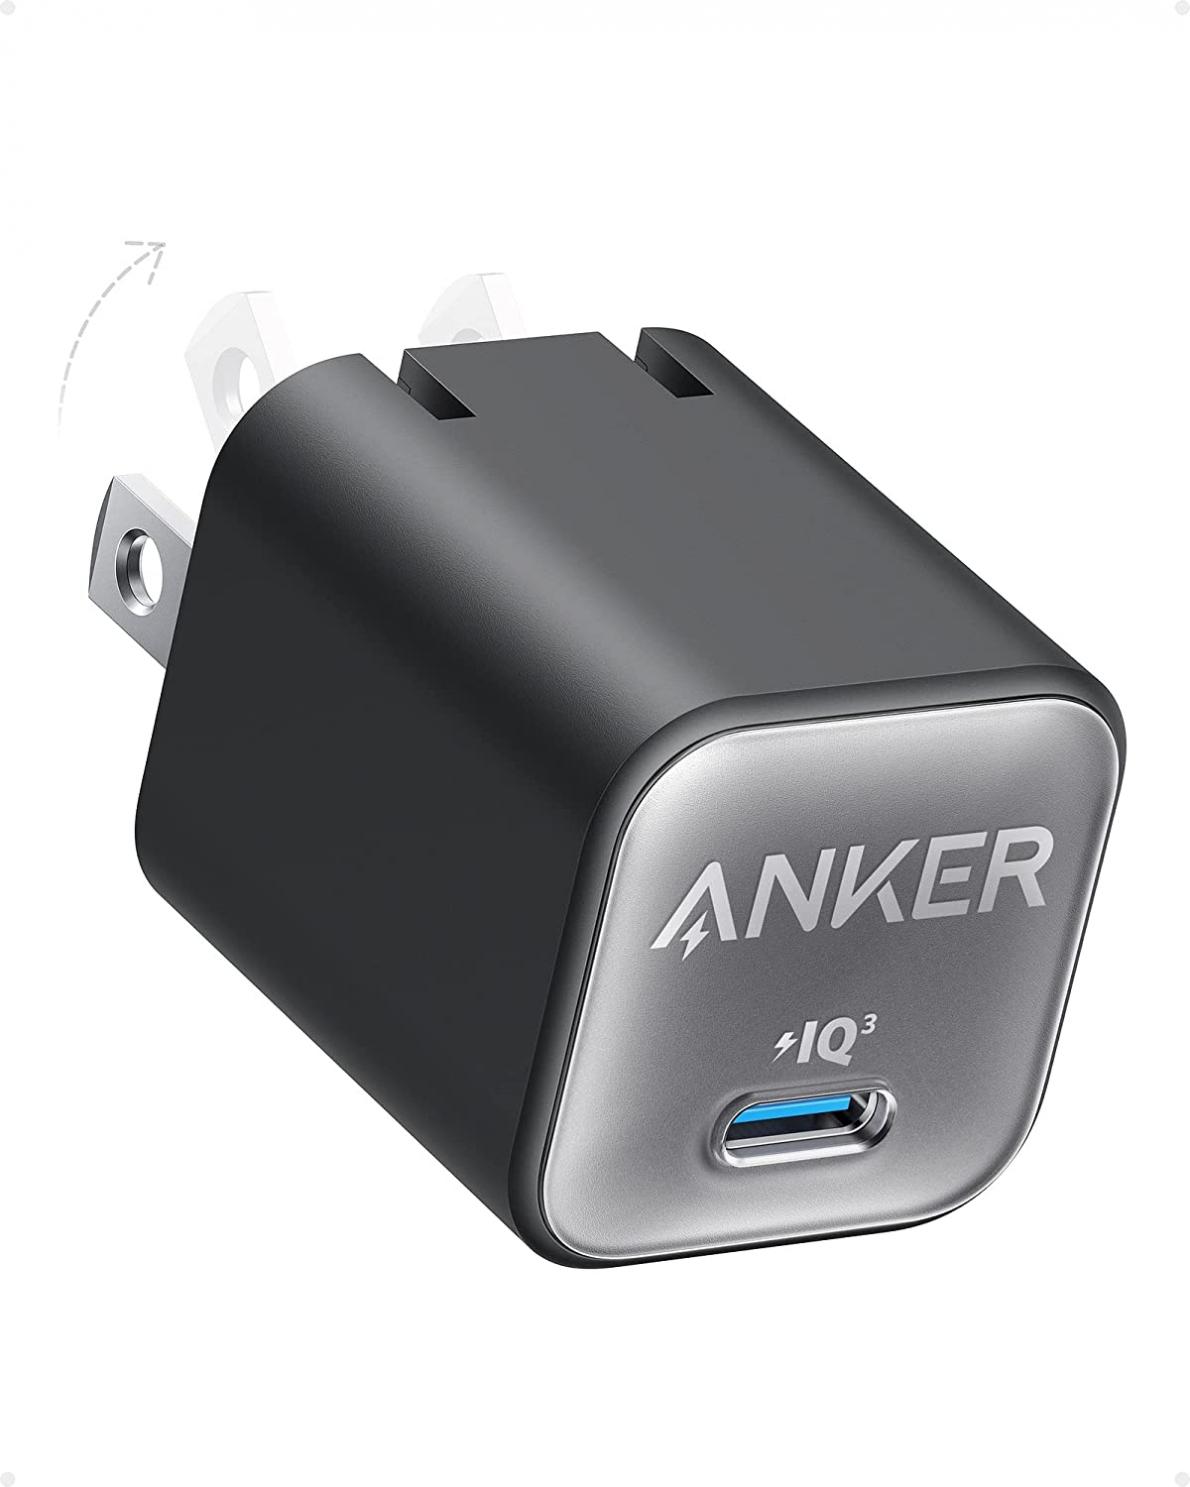 Anker USB C GaN Charger 30W, 511 Charger (Nano 3), PIQ 3.0 Foldable PPS Fast Charger, Anker Nano 3 for iPhone 14/14 Pro/14 Pro Max/13 Pro/13 Pro Max, Galaxy, iPad (Cable Not Included) - Phantom Black